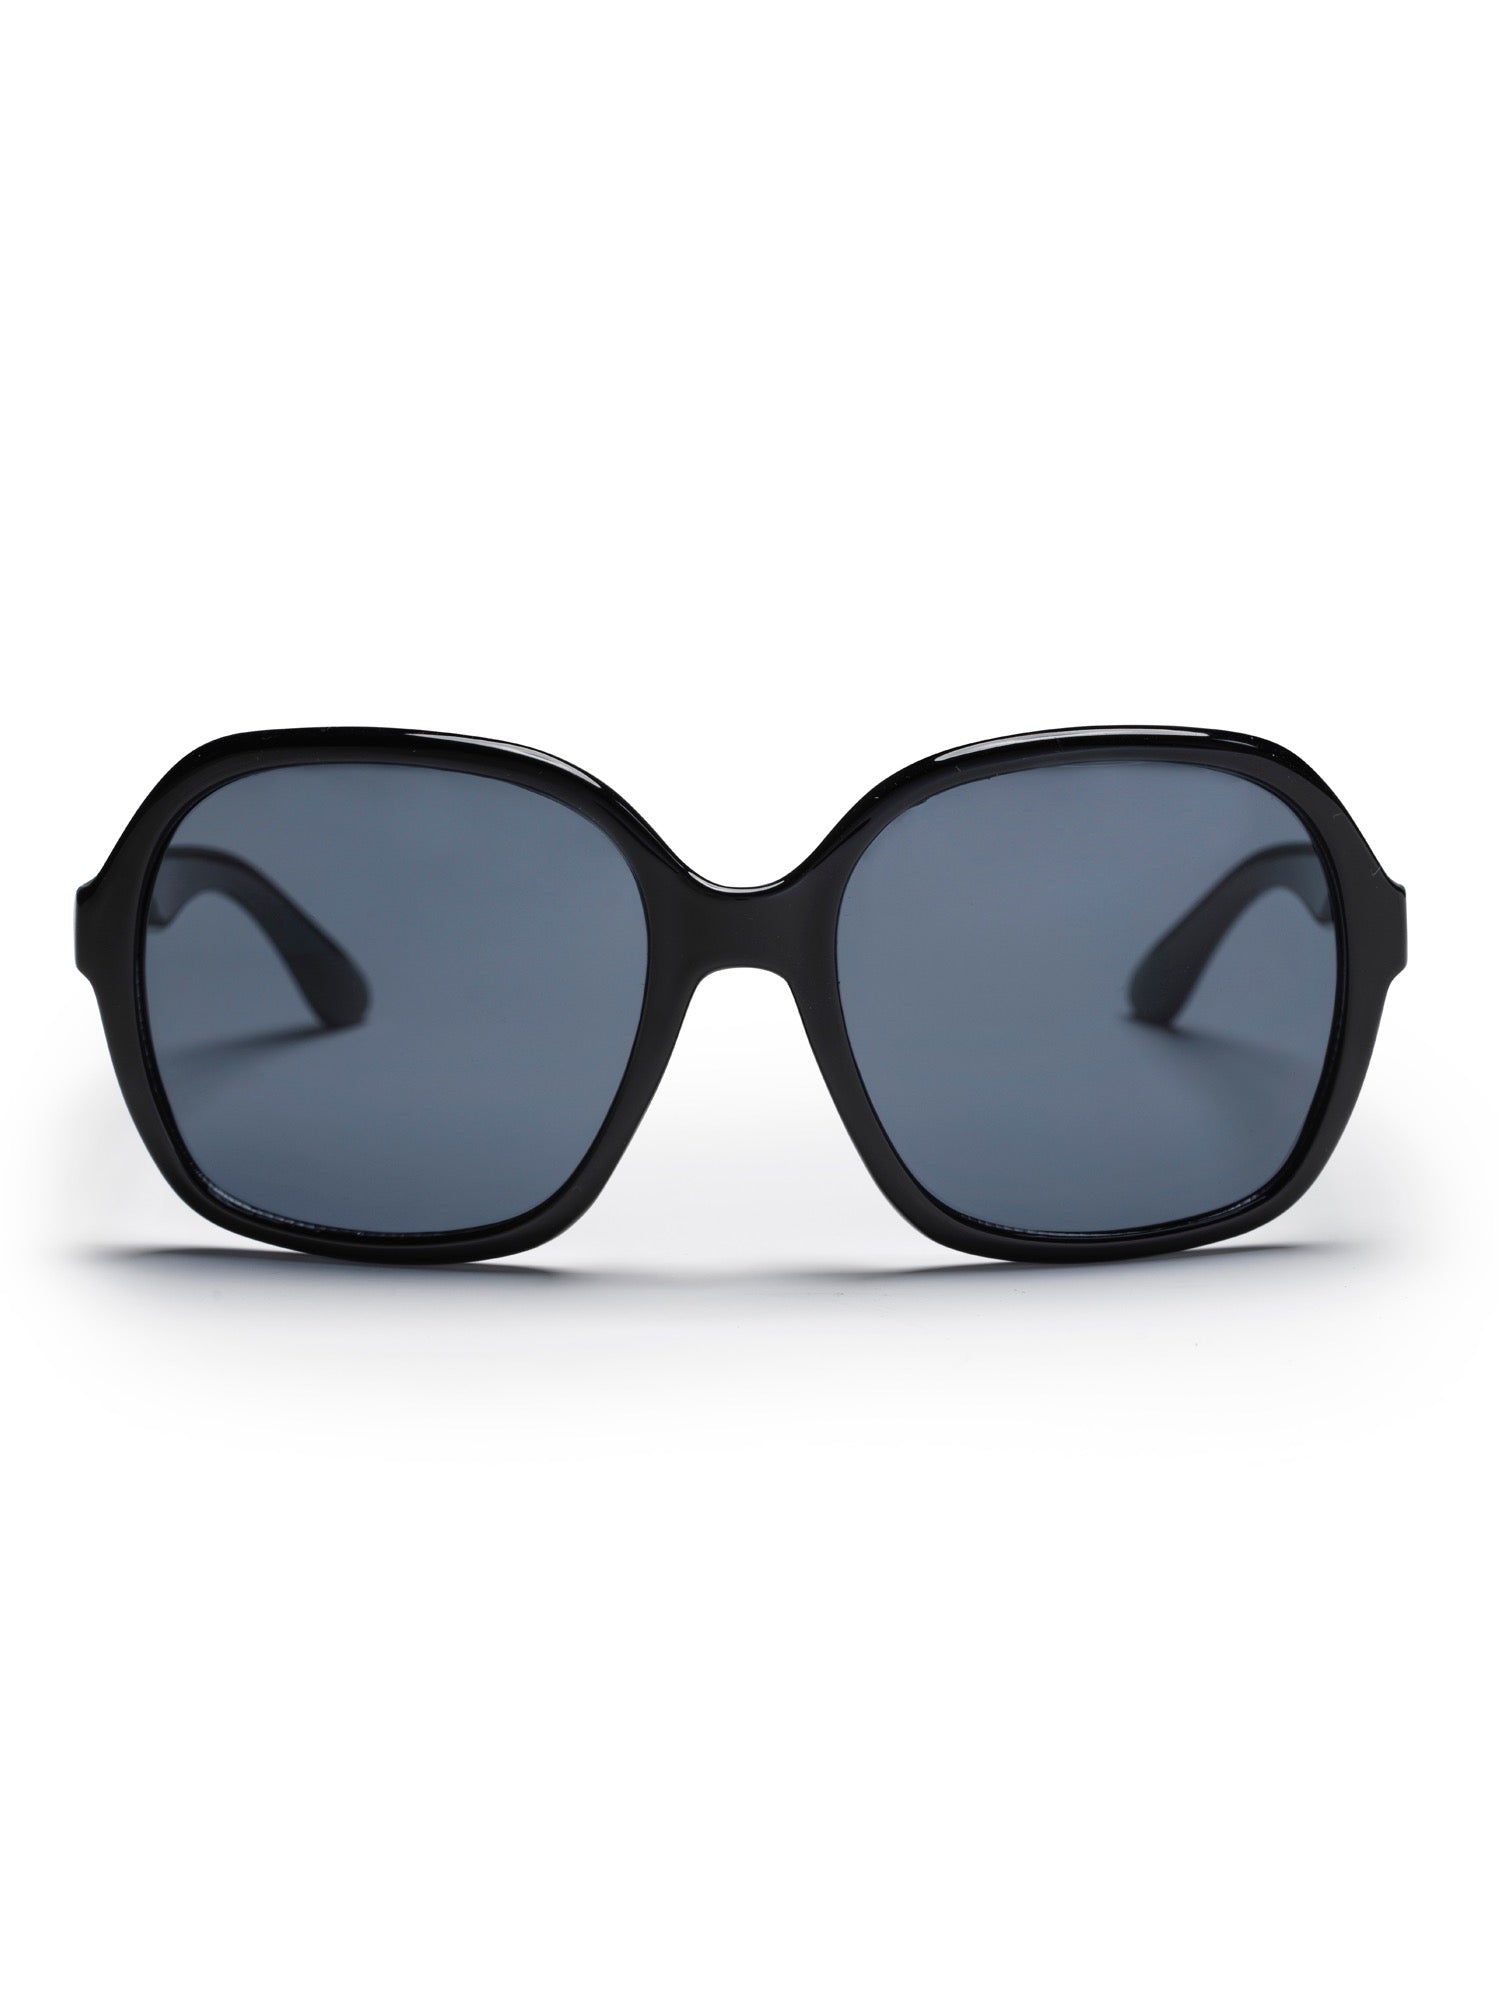 CHPO - Gucc Sunglasses - Recycled Plastic - Weekendbee - sustainable sportswear